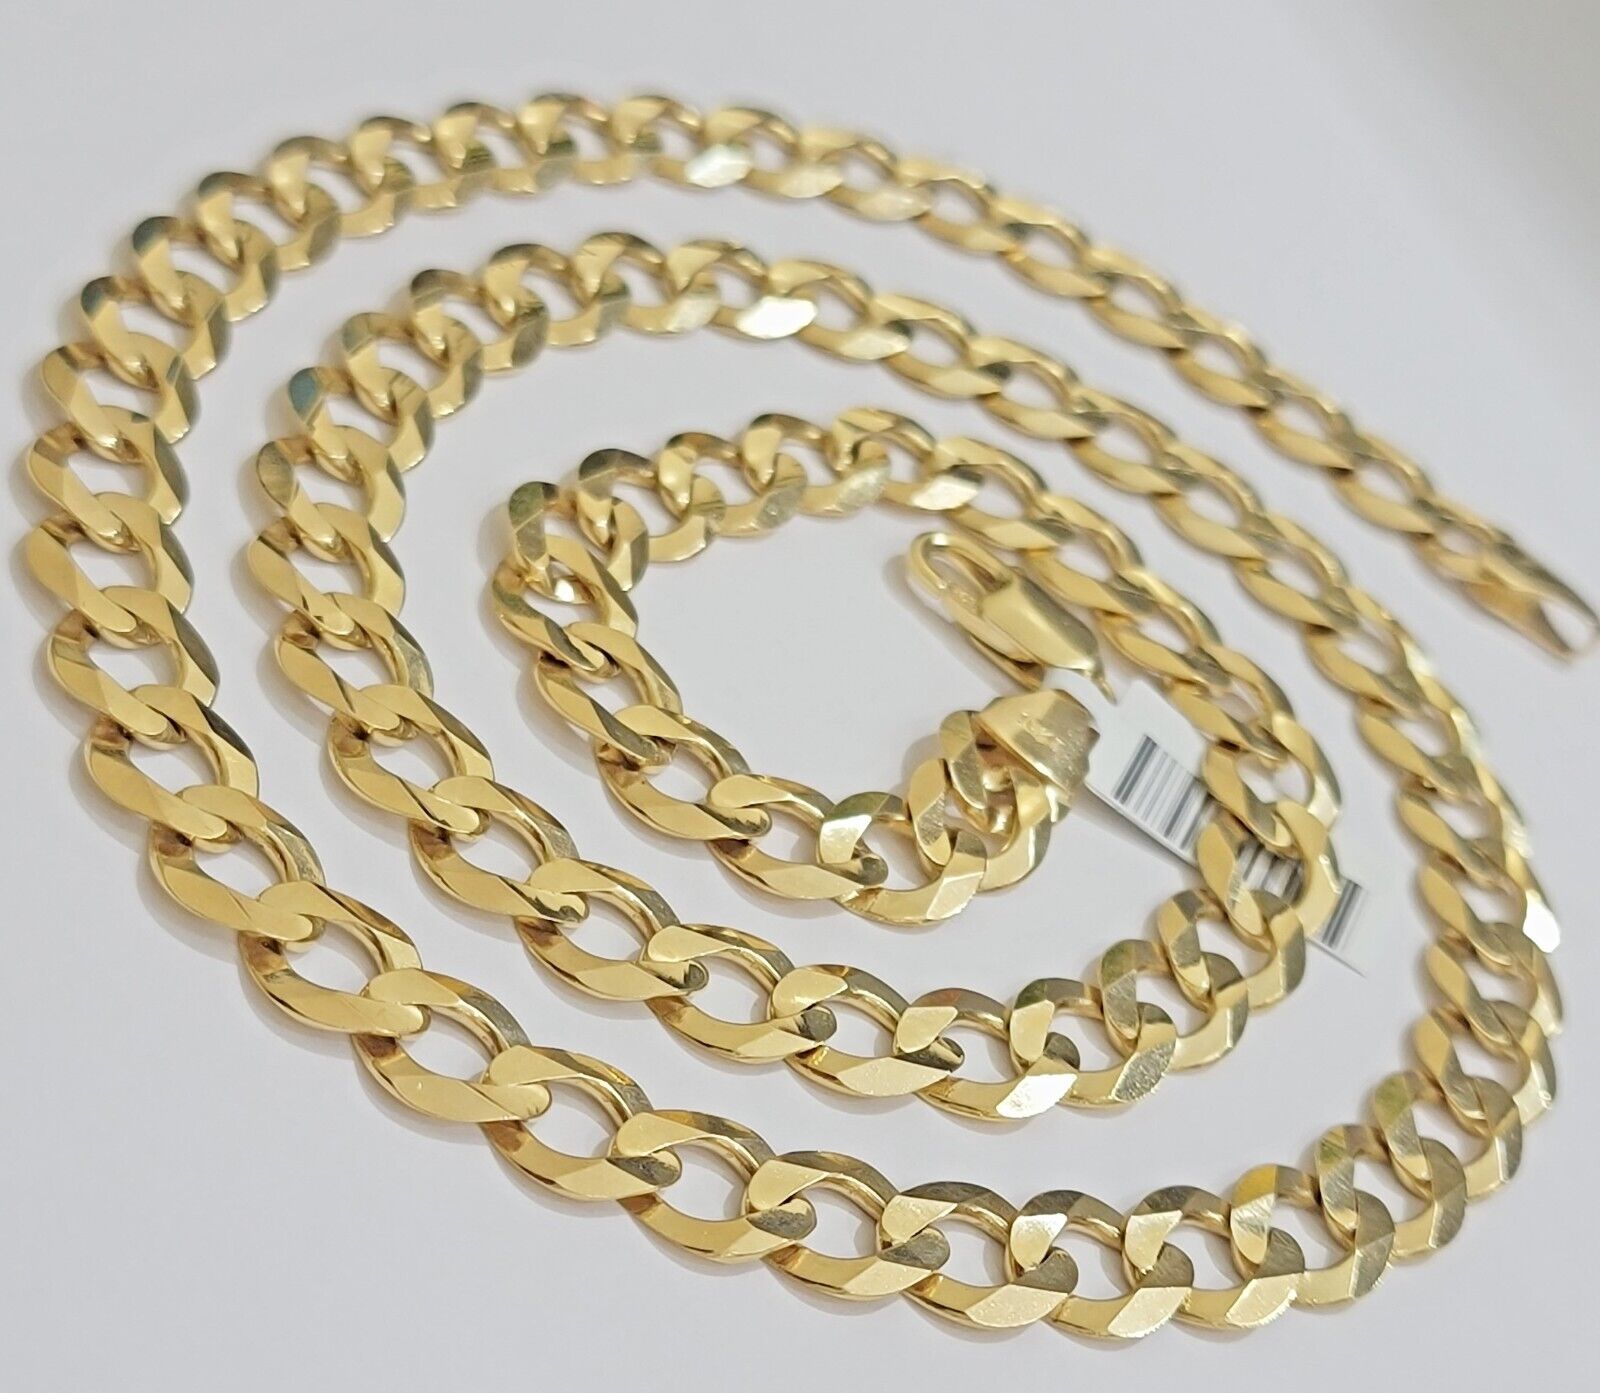 10K Gold 4mm Flat Curb Chain 20 Inches